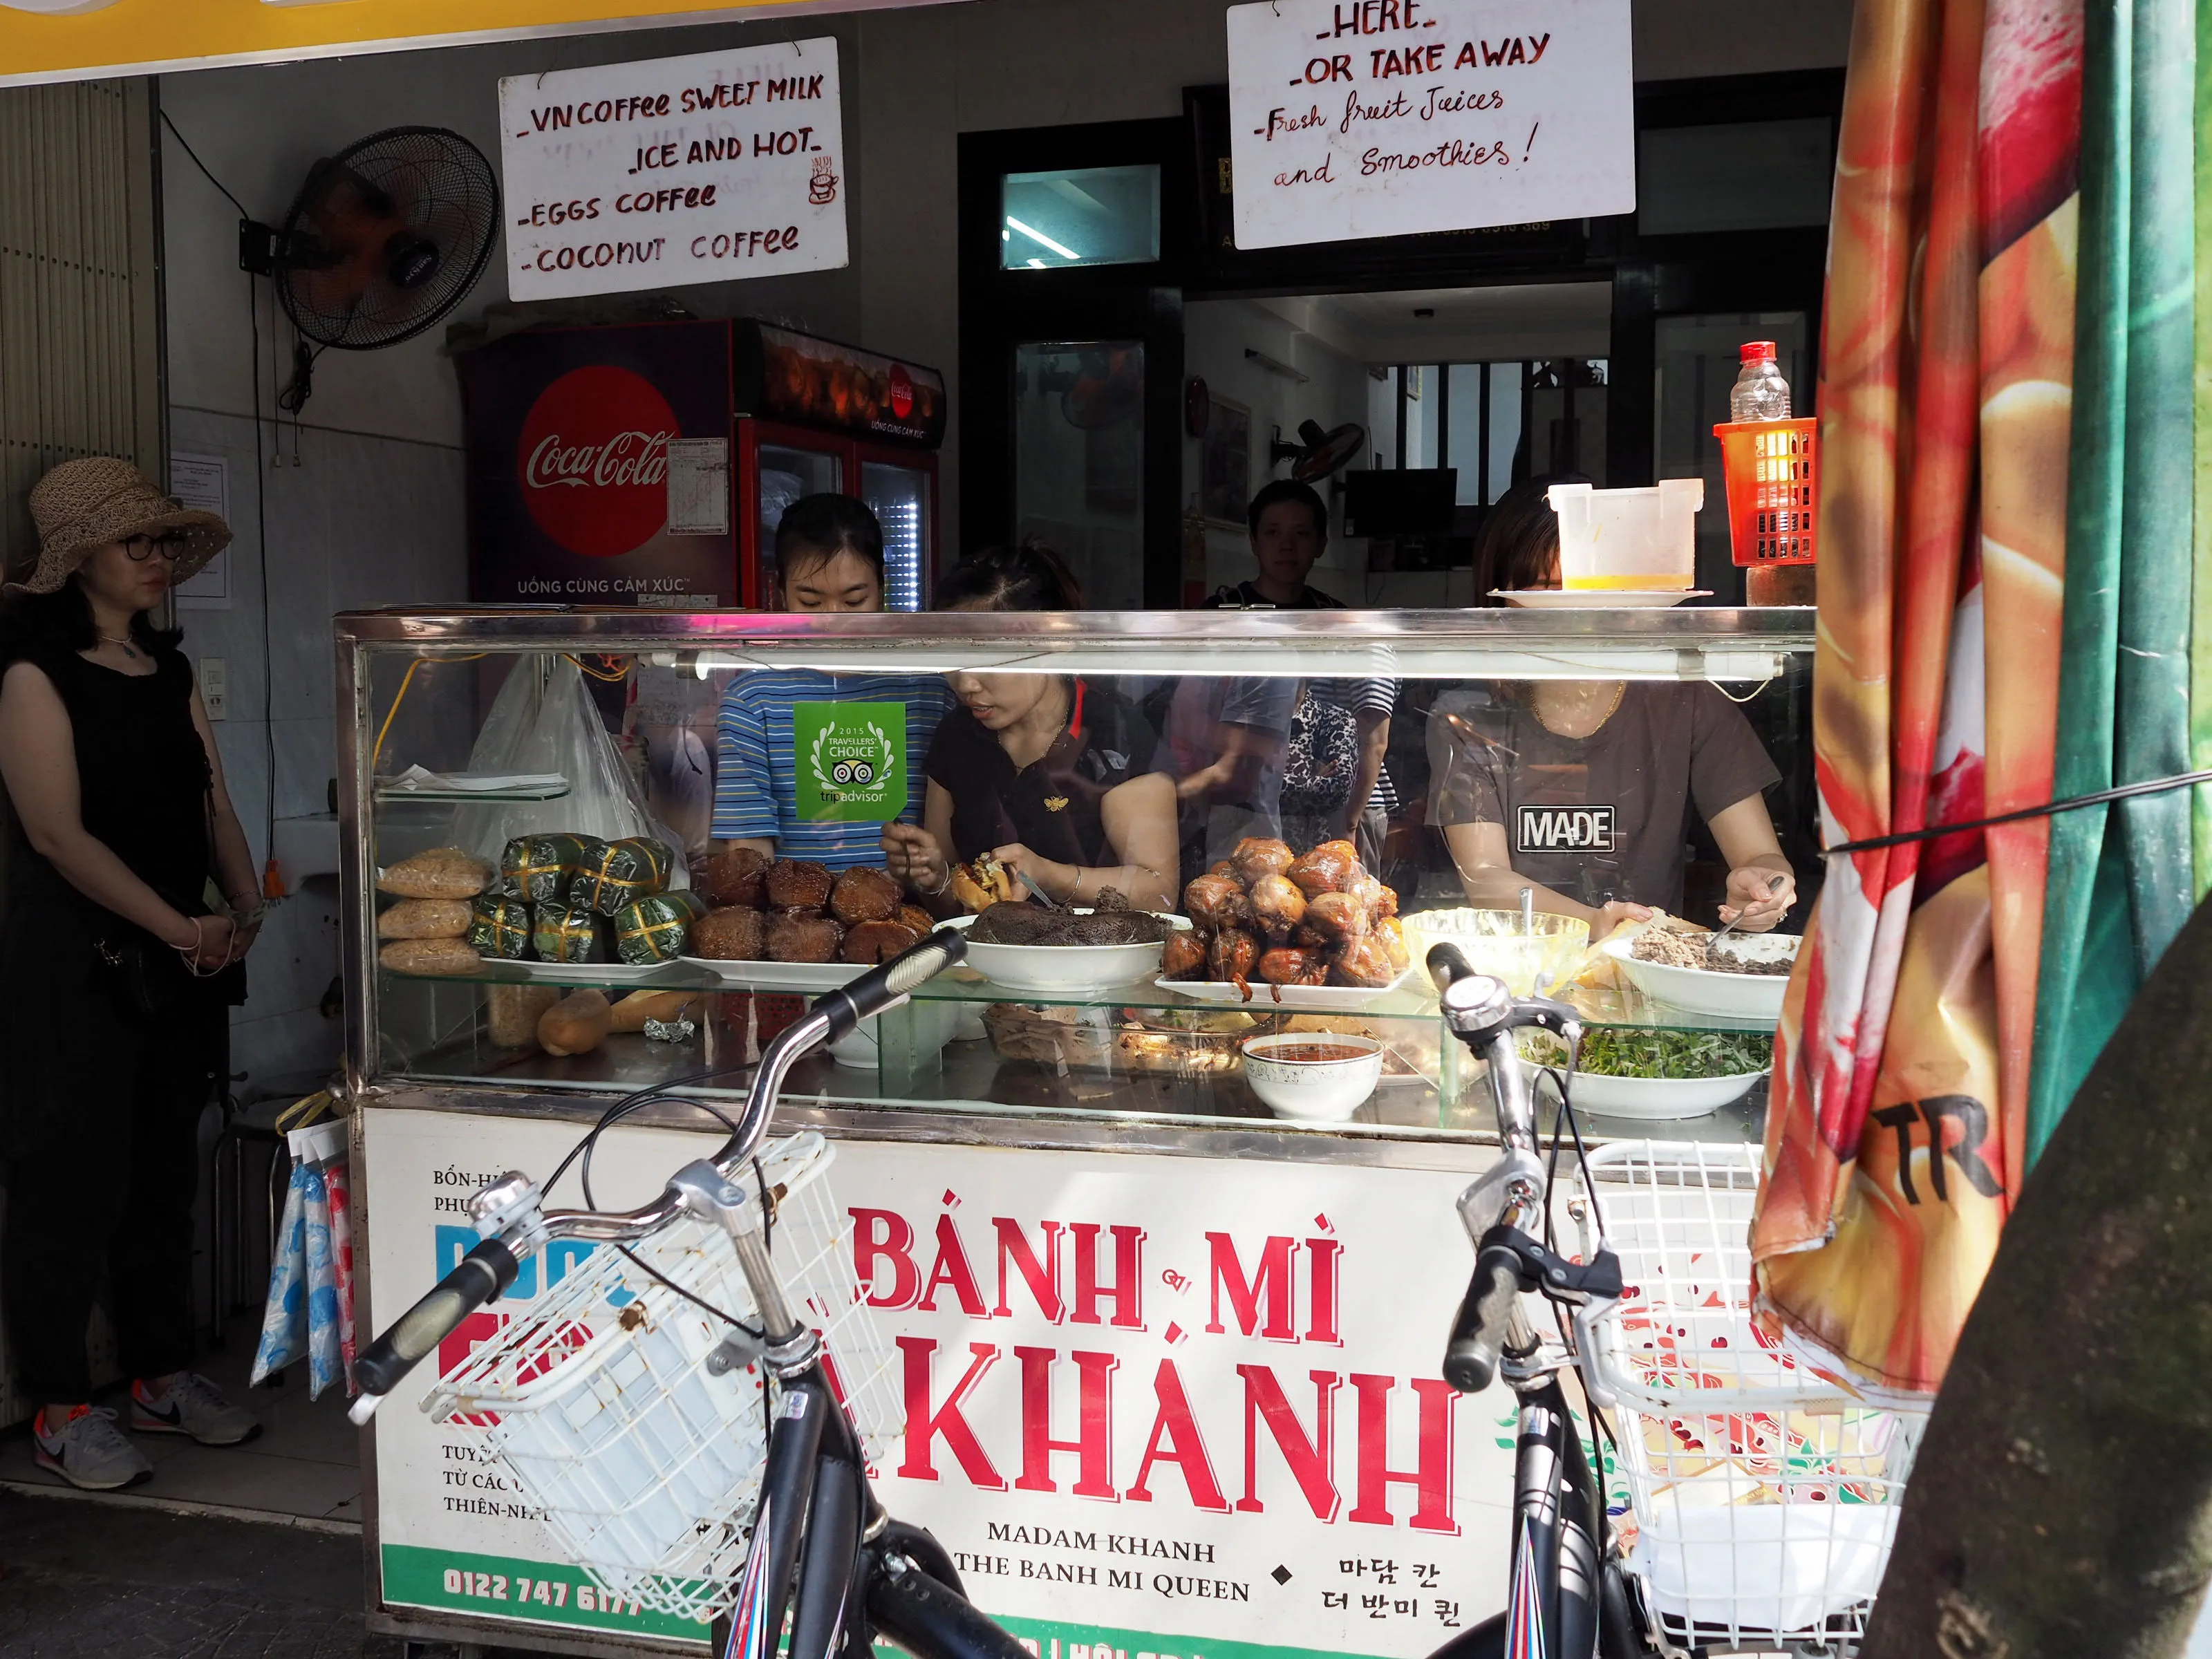 Banh Mi Khanh is one of the most popular places for banh mi in Hoi An.